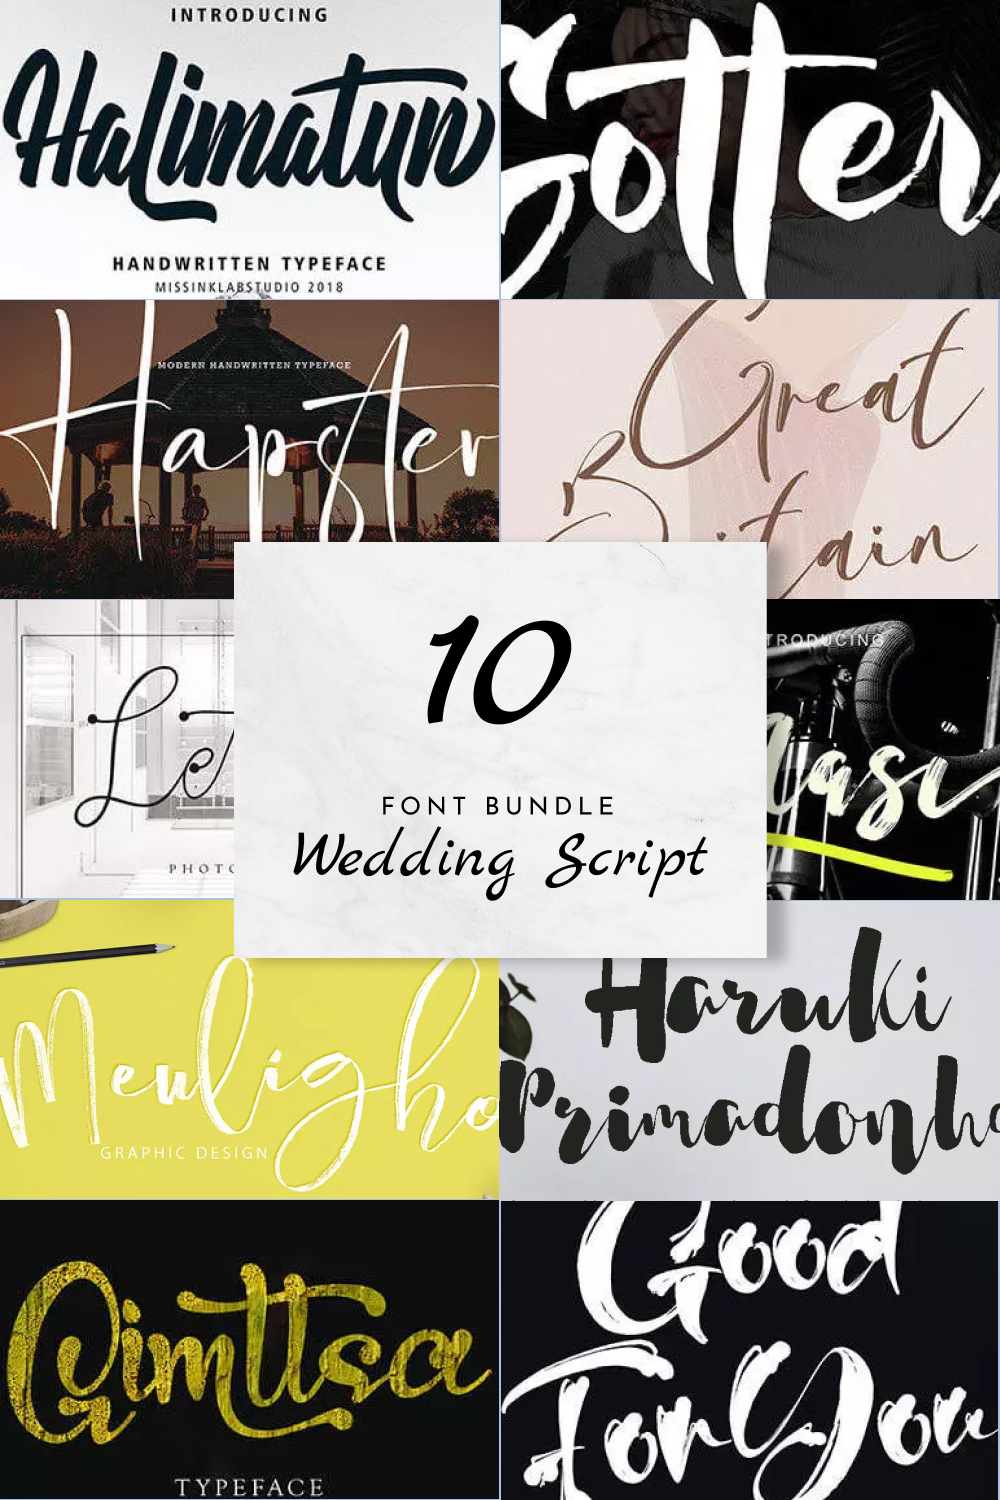 A set of images with an example of amazing fonts.